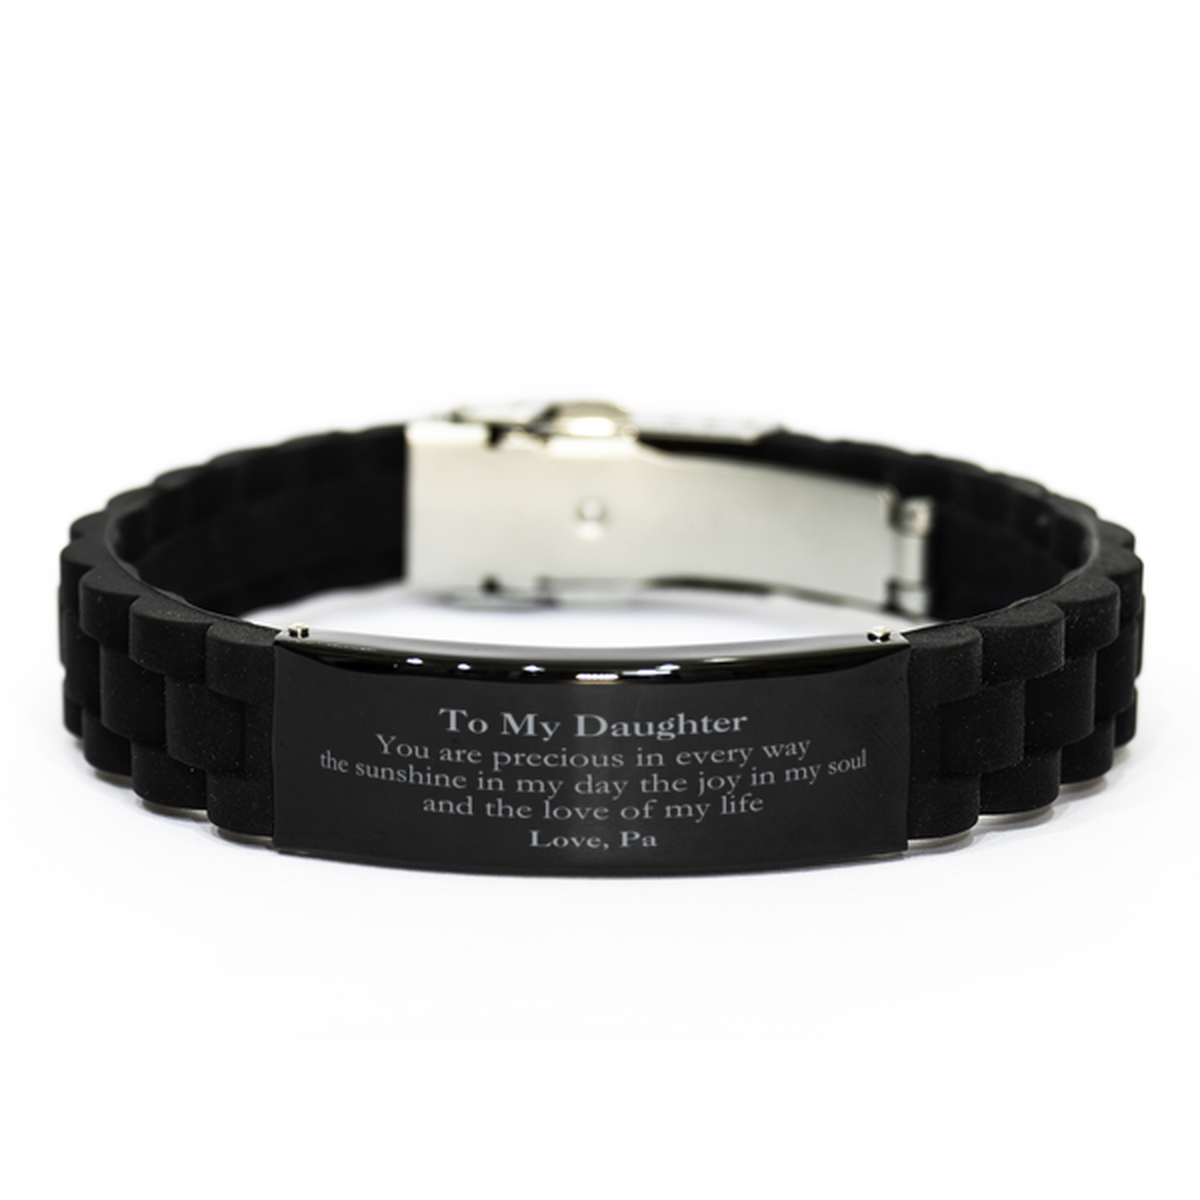 Graduation Gifts for Daughter Black Glidelock Clasp Bracelet Present from Pa, Christmas Daughter Birthday Gifts Daughter You are precious in every way the sunshine in my day. Love, Pa